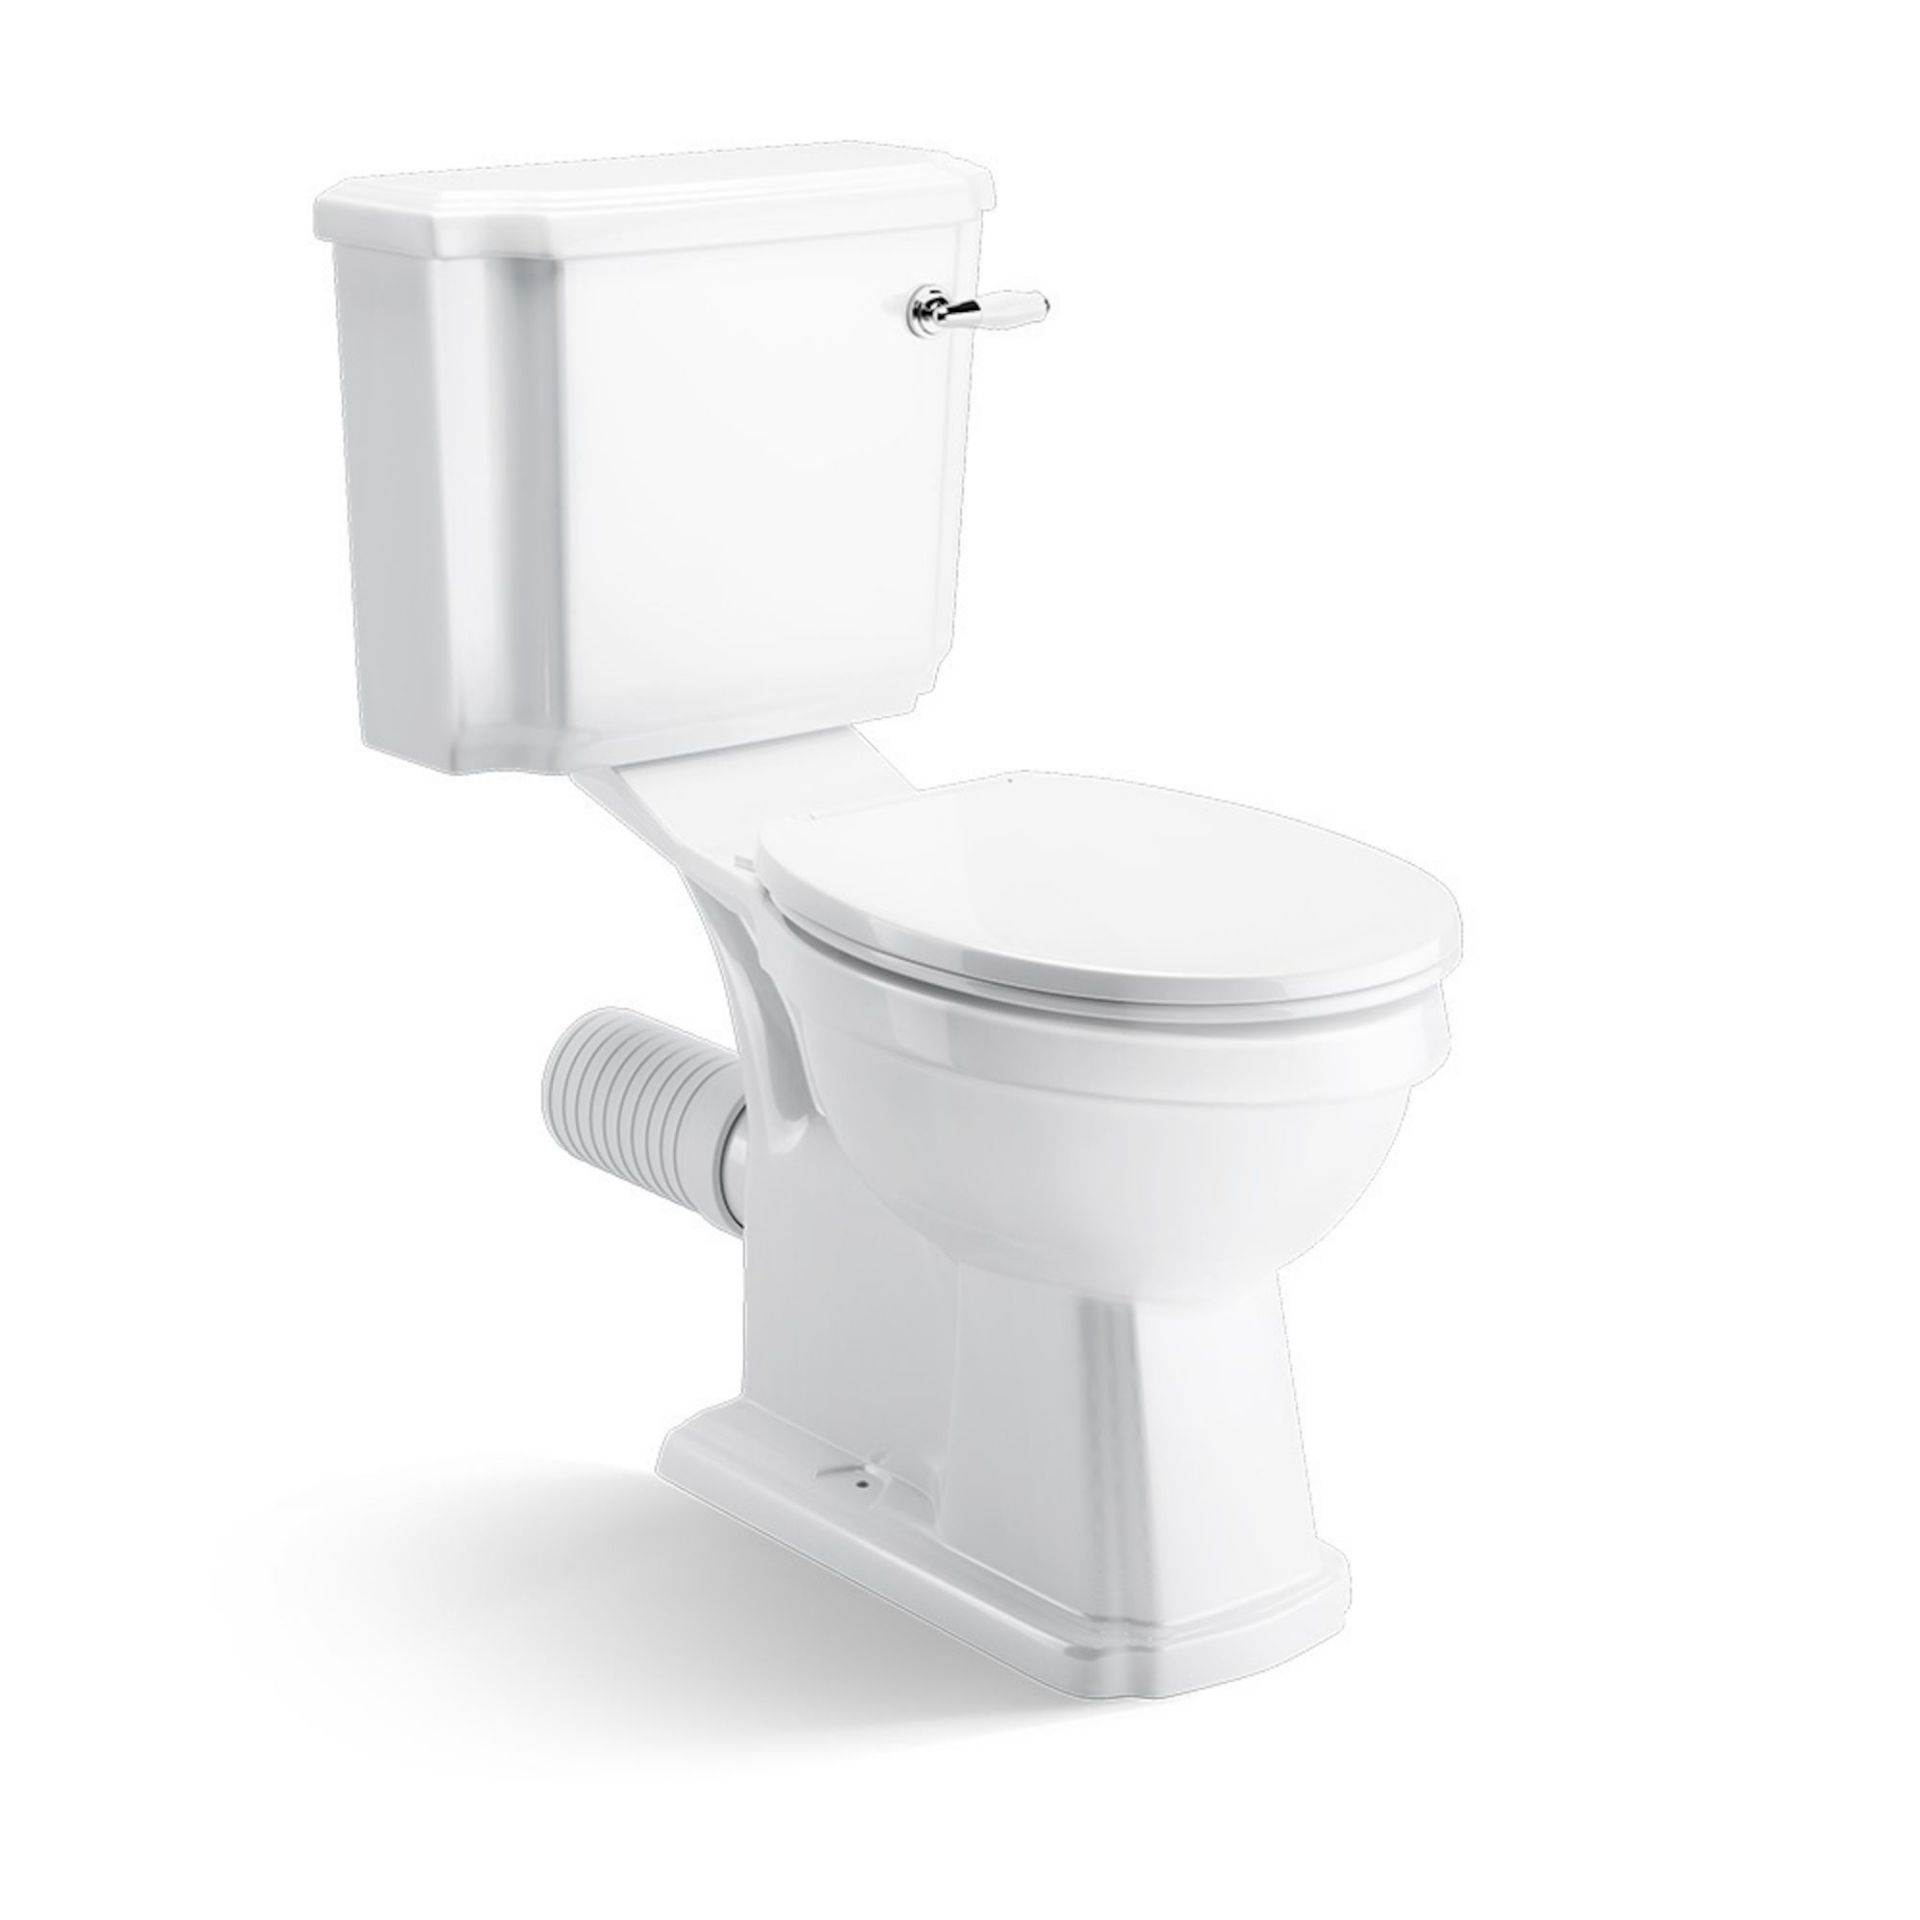 NEW & BOXED Cambridge Traditional Close Coupled Toilet & Cistern - White Seat. CCG629PAN. - Image 2 of 2